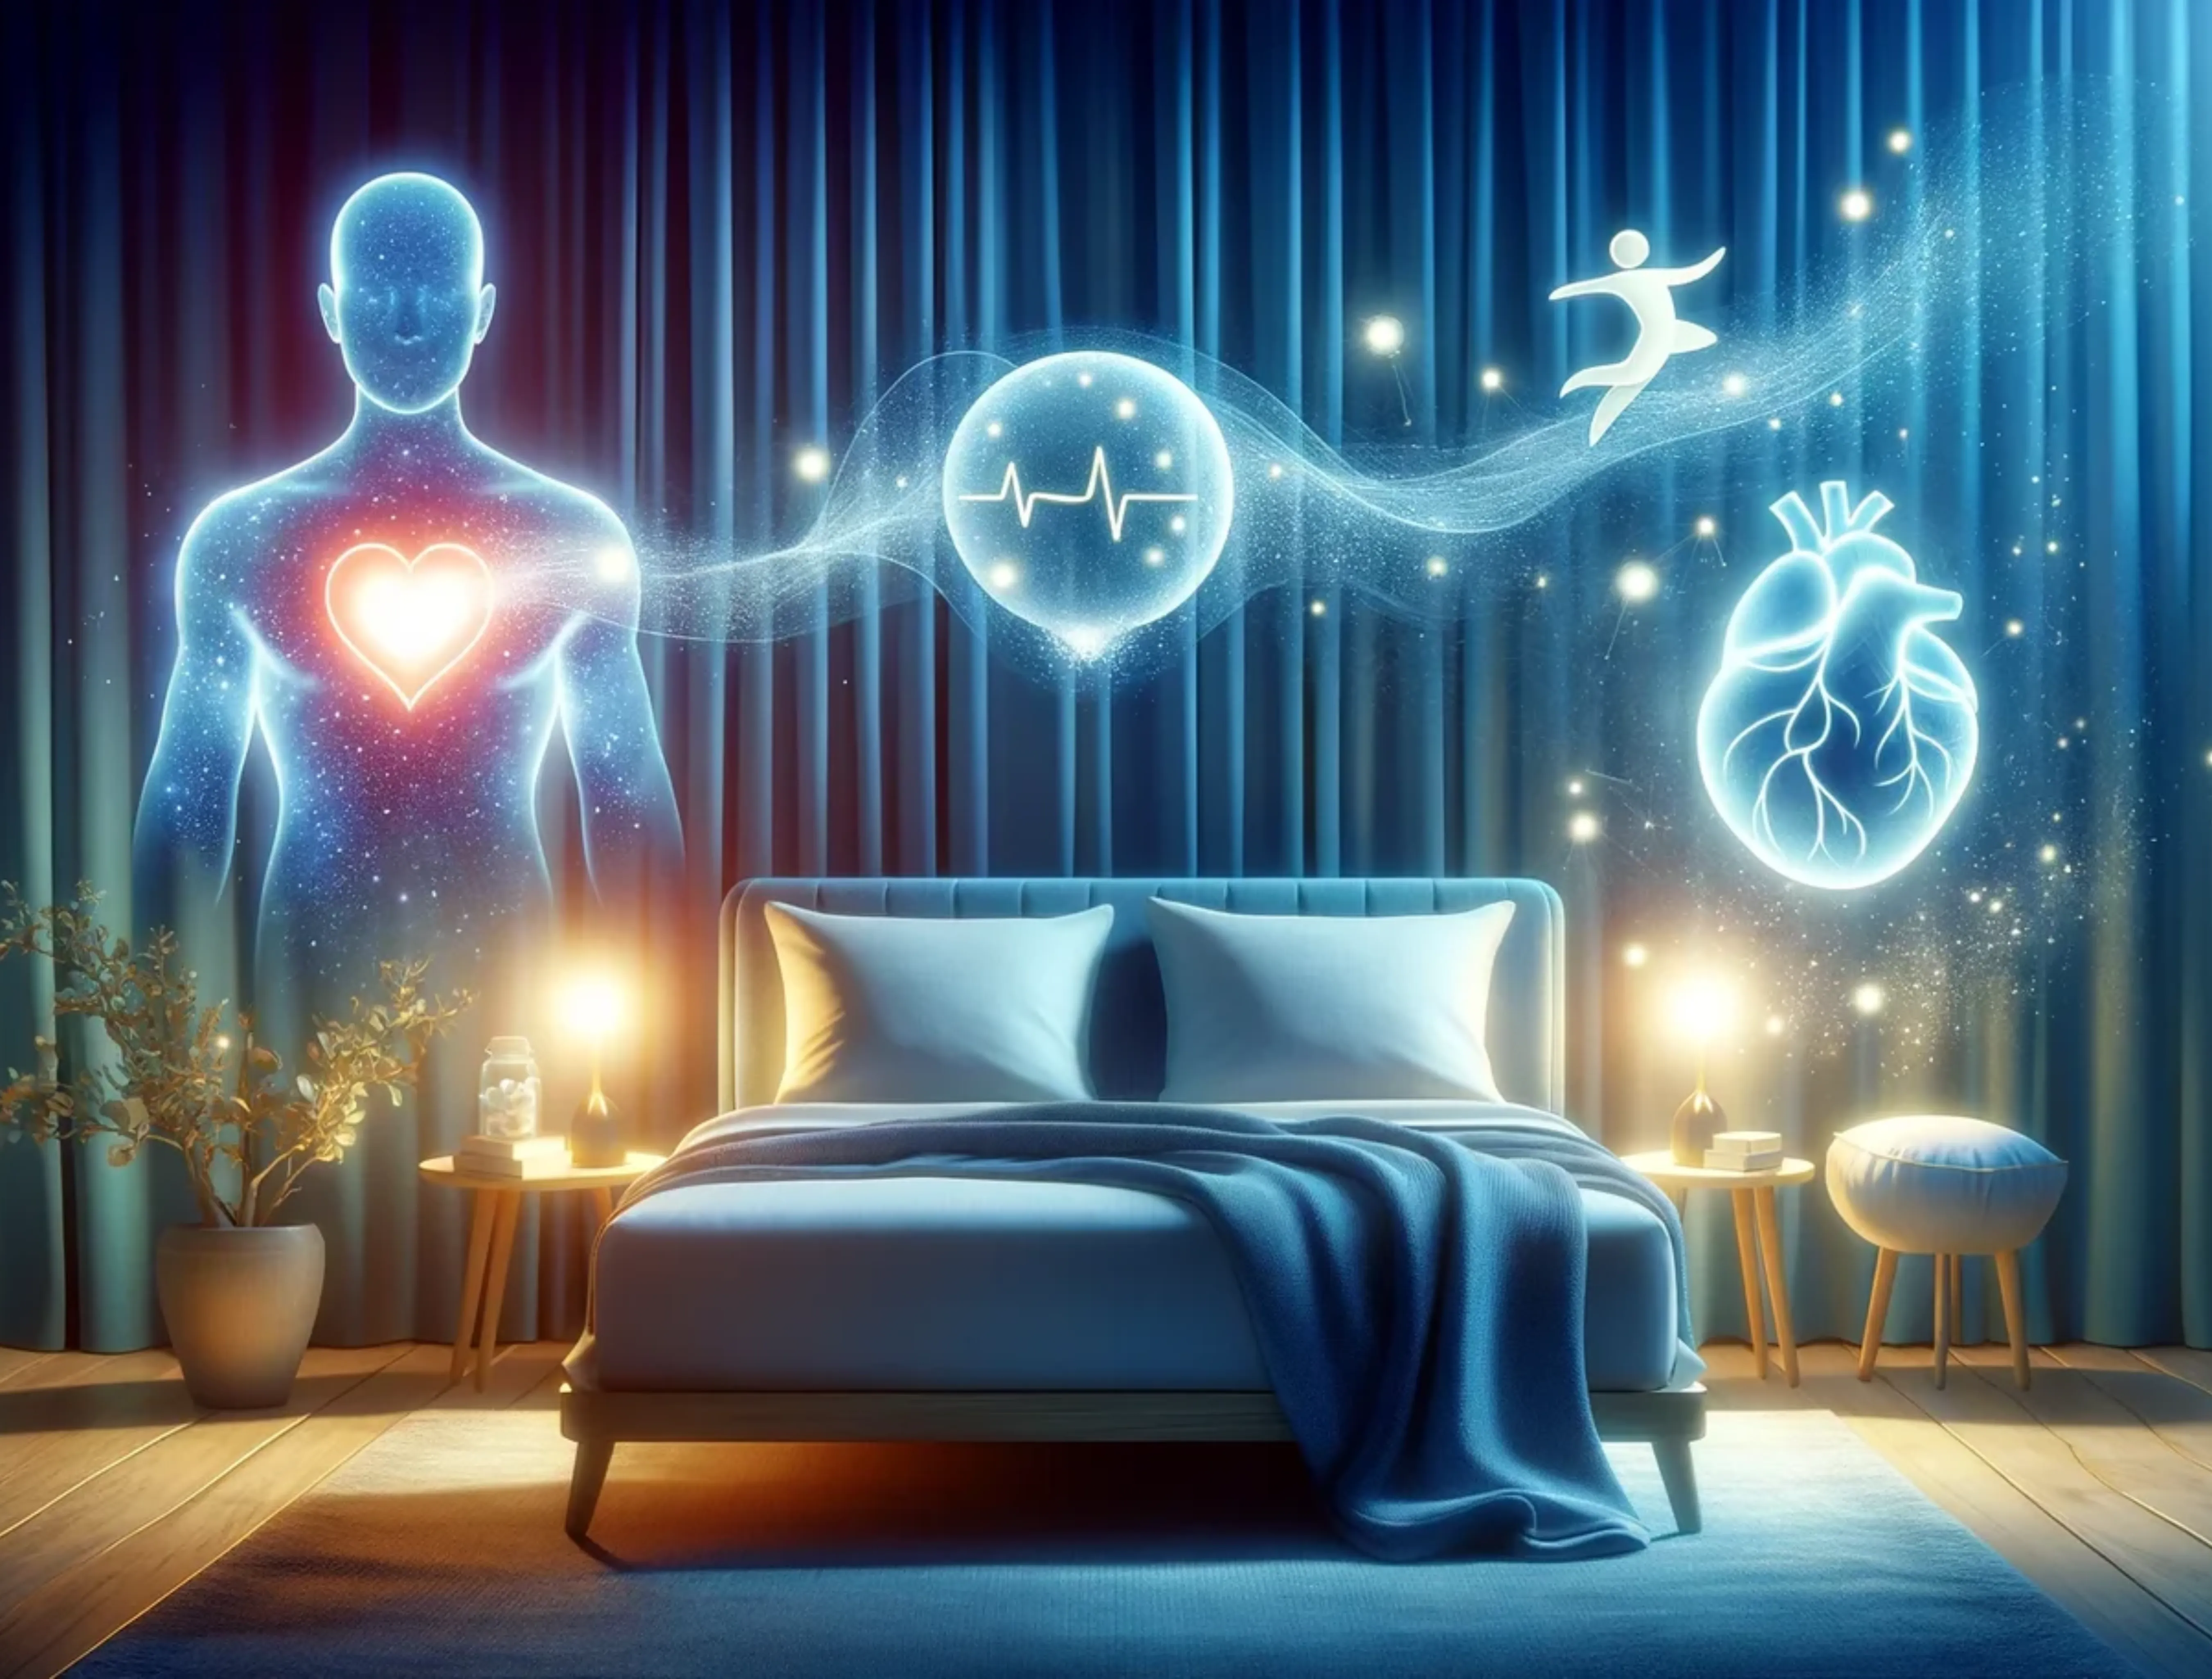 Image of human figure with graphics of bed for sleeping